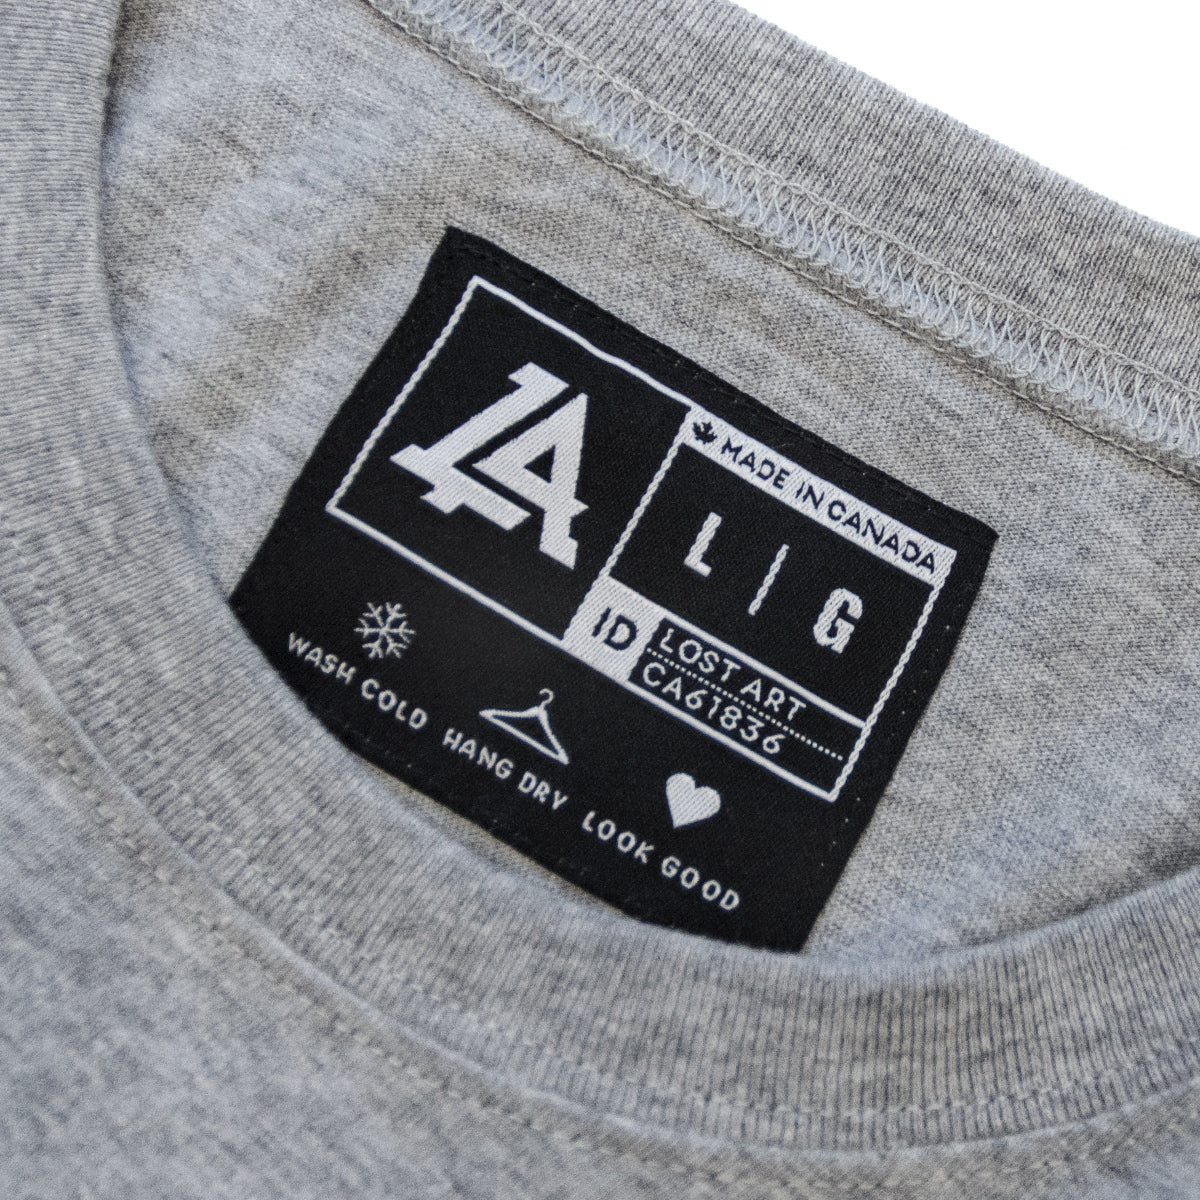 Lost Art Canada - white on grey basic logo tee inside tag view